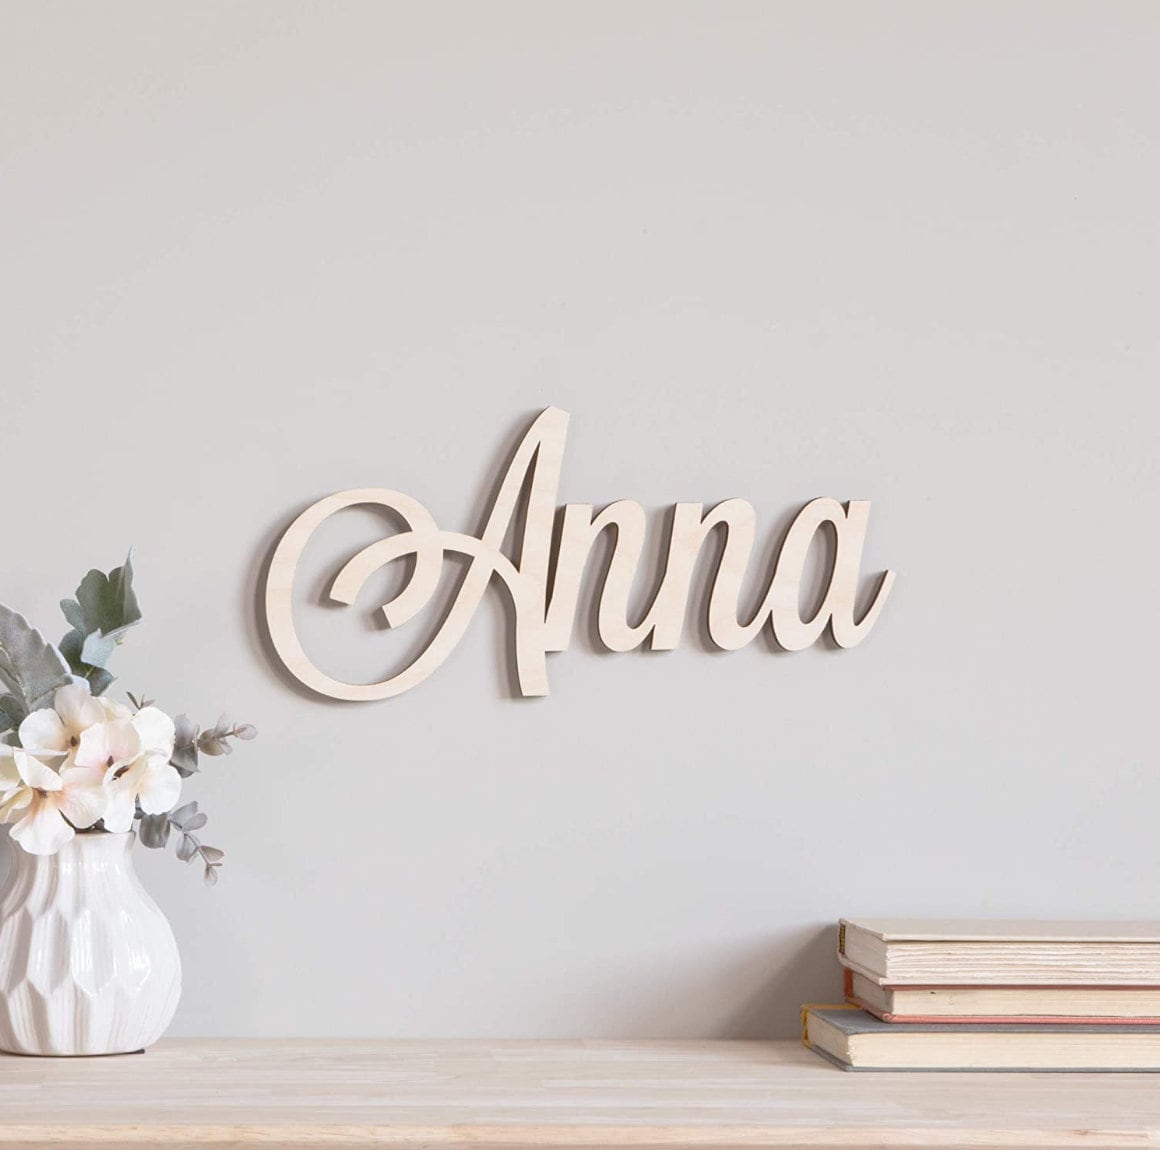 Custom Wooden Letter Sign Wall Decor, Large Wall Letters Baby Name Initial  in Cursive Calligraphy, Wood Letter…